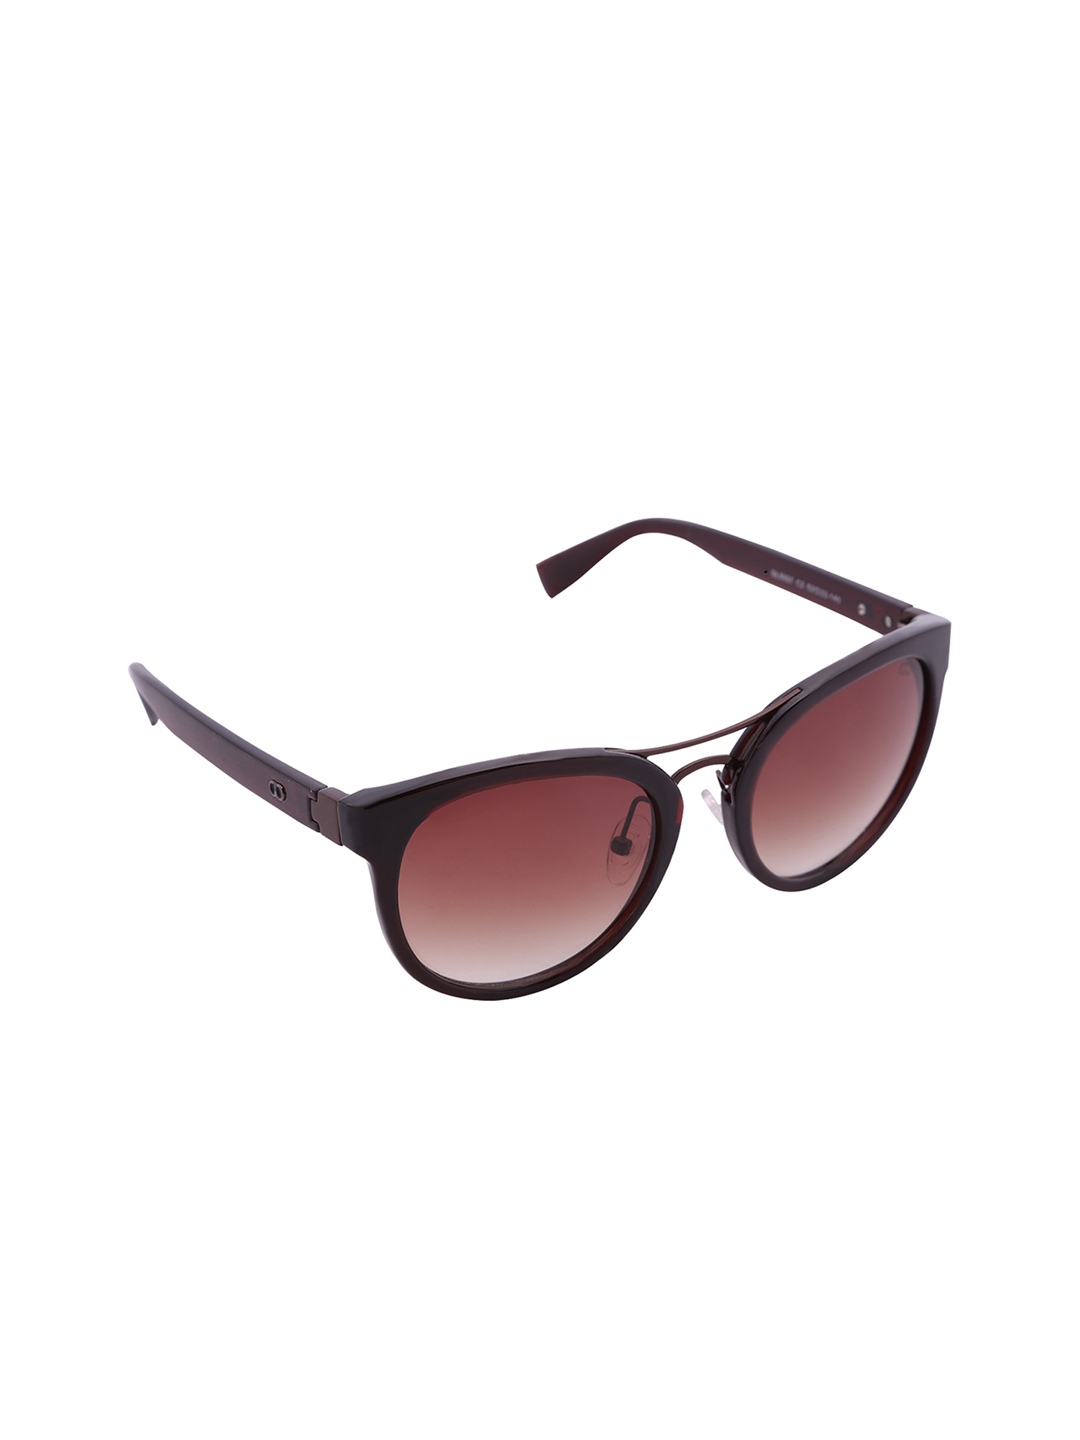 

GIO COLLECTION Women Oval Sunglasses, Brown